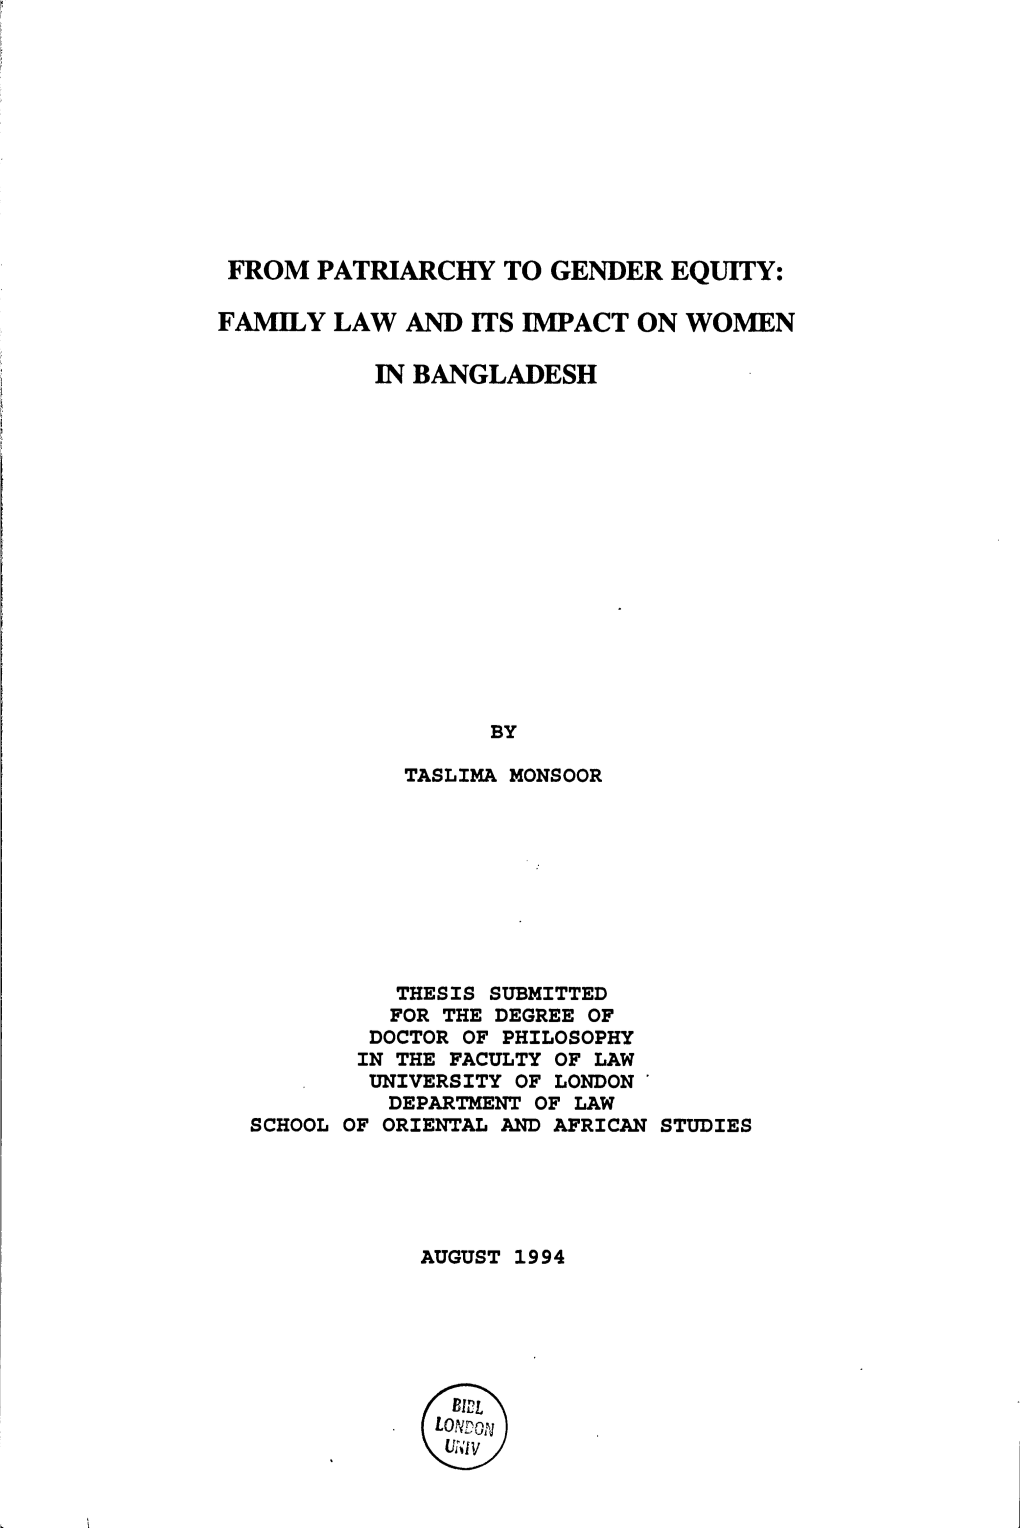 Family Law and Its Impact on Women in Bangladesh